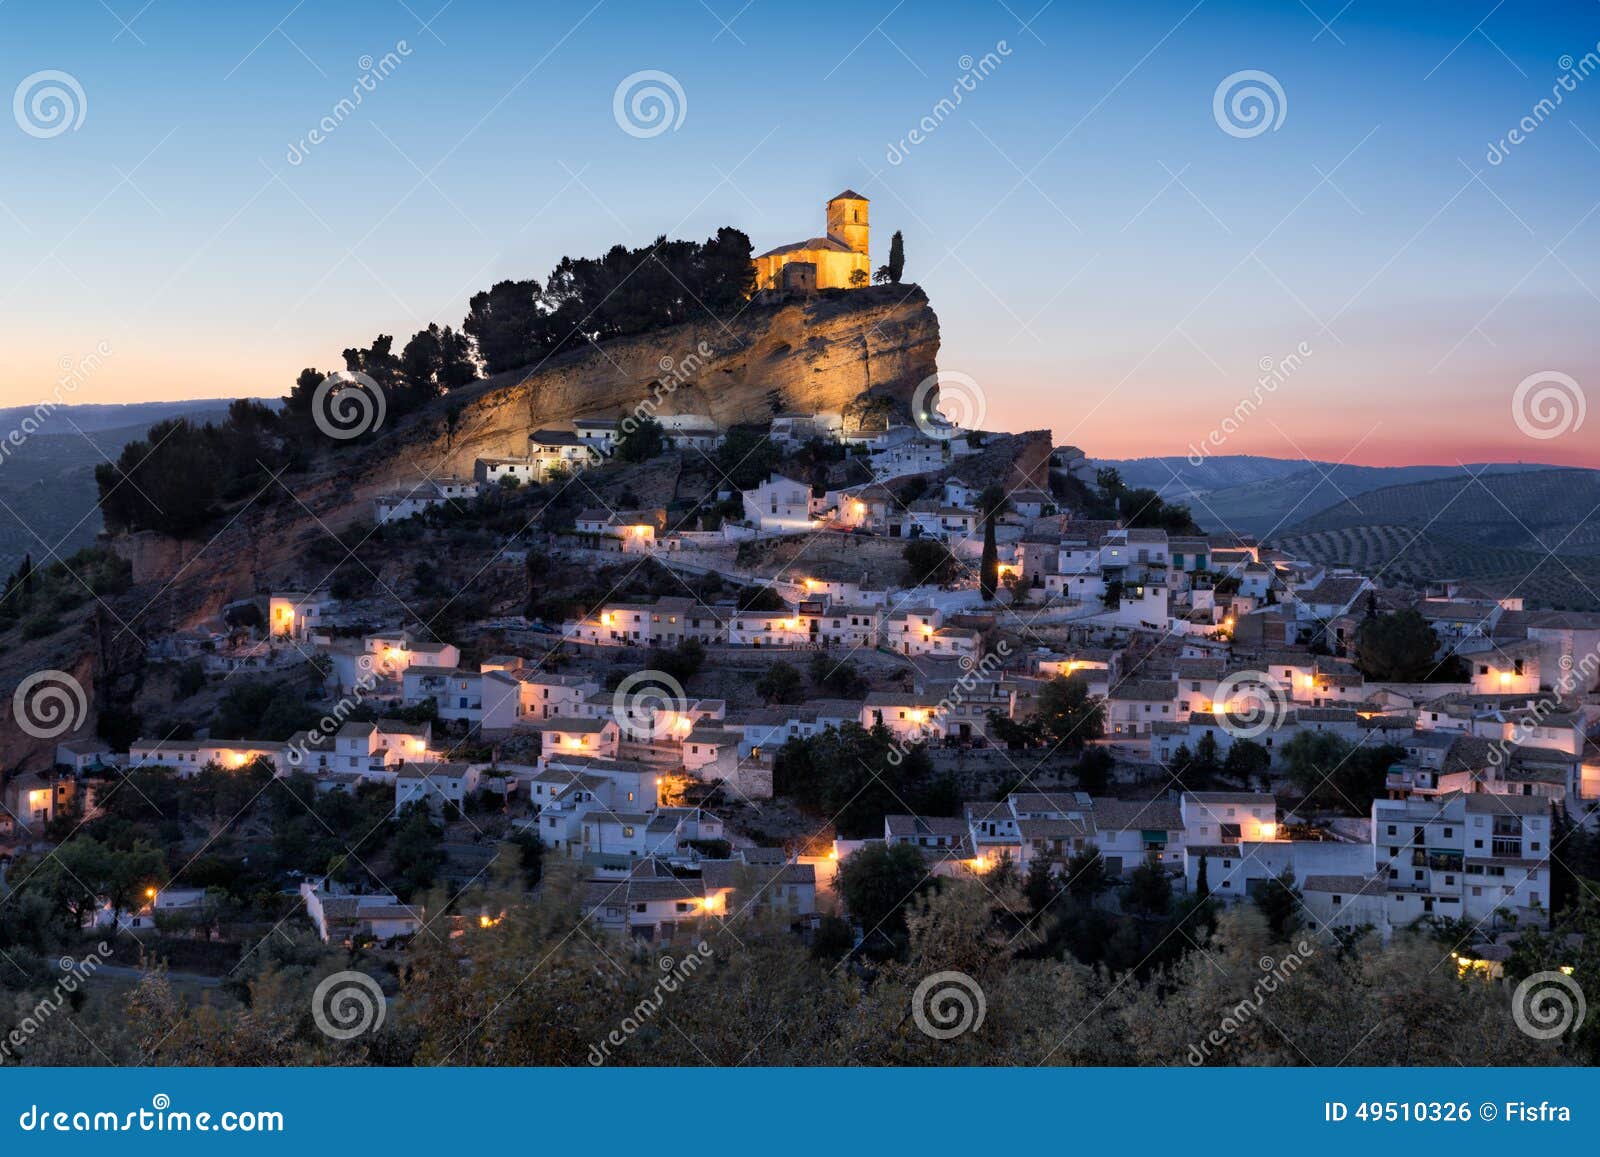 montefrio at sunset, andalusia, spain